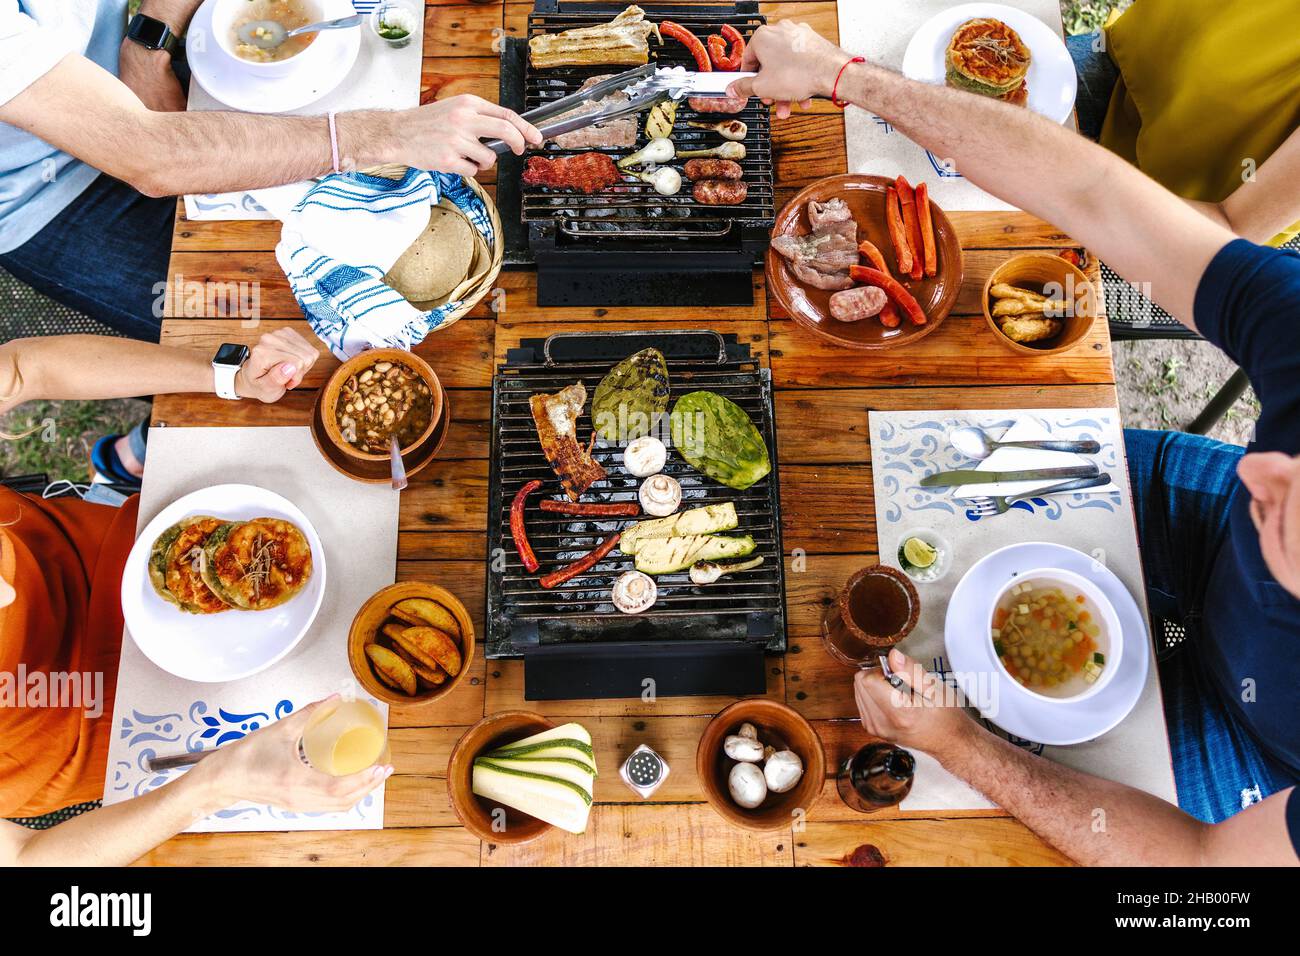 Group of latin friends eating mexican tacos and traditional food, snacks and people's hands over table, top view. Mexican cuisine Latin America Stock Photo